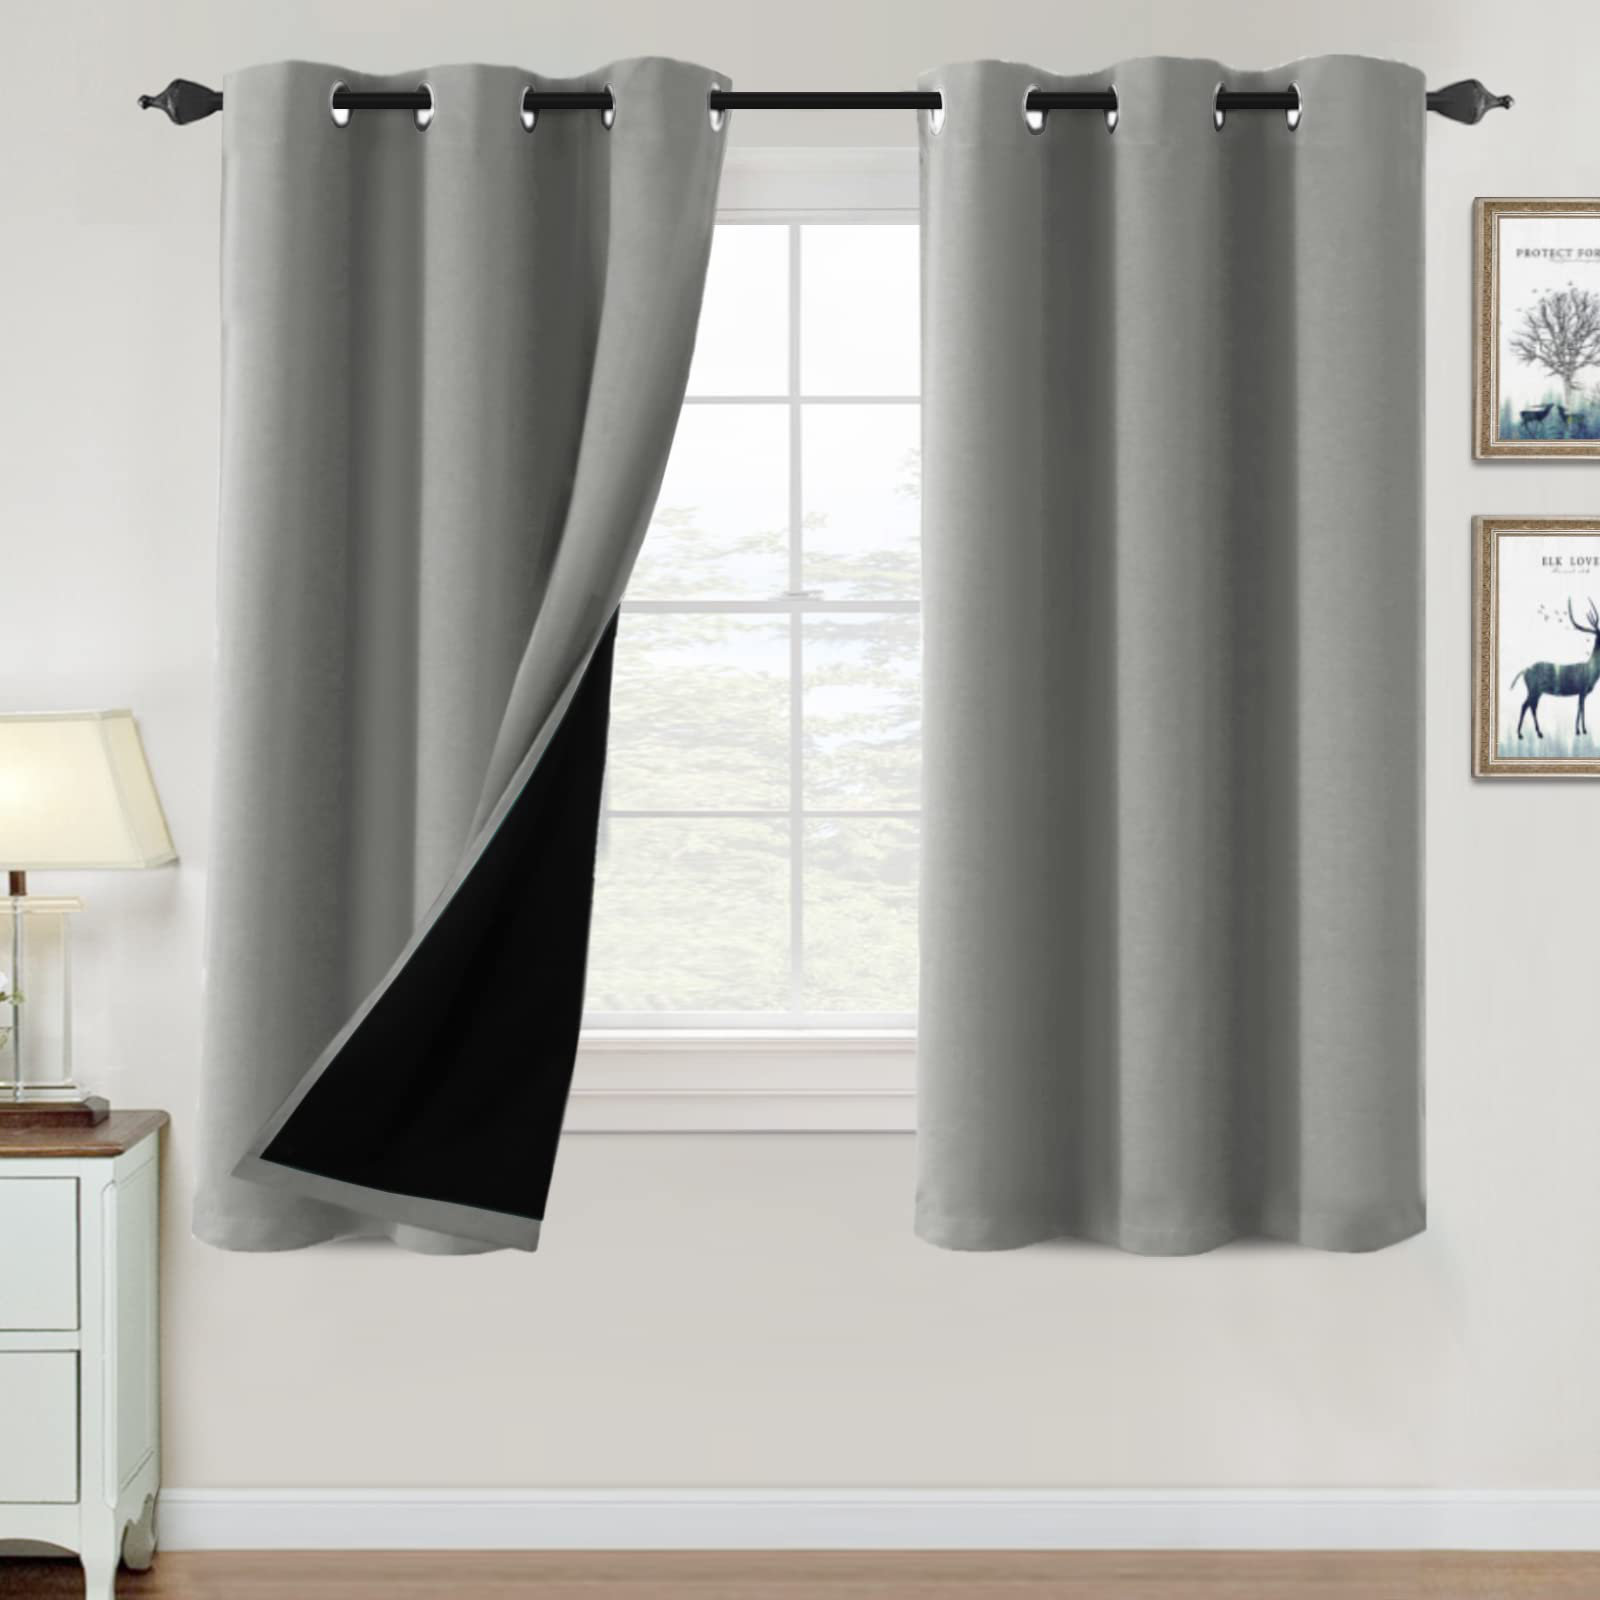 Window Blackout Curtains, Portable Window Blind Curtain Shade Window Cover  100% Black Out Diy Anti Uv & Privacy Protection Room Darkening Drapes